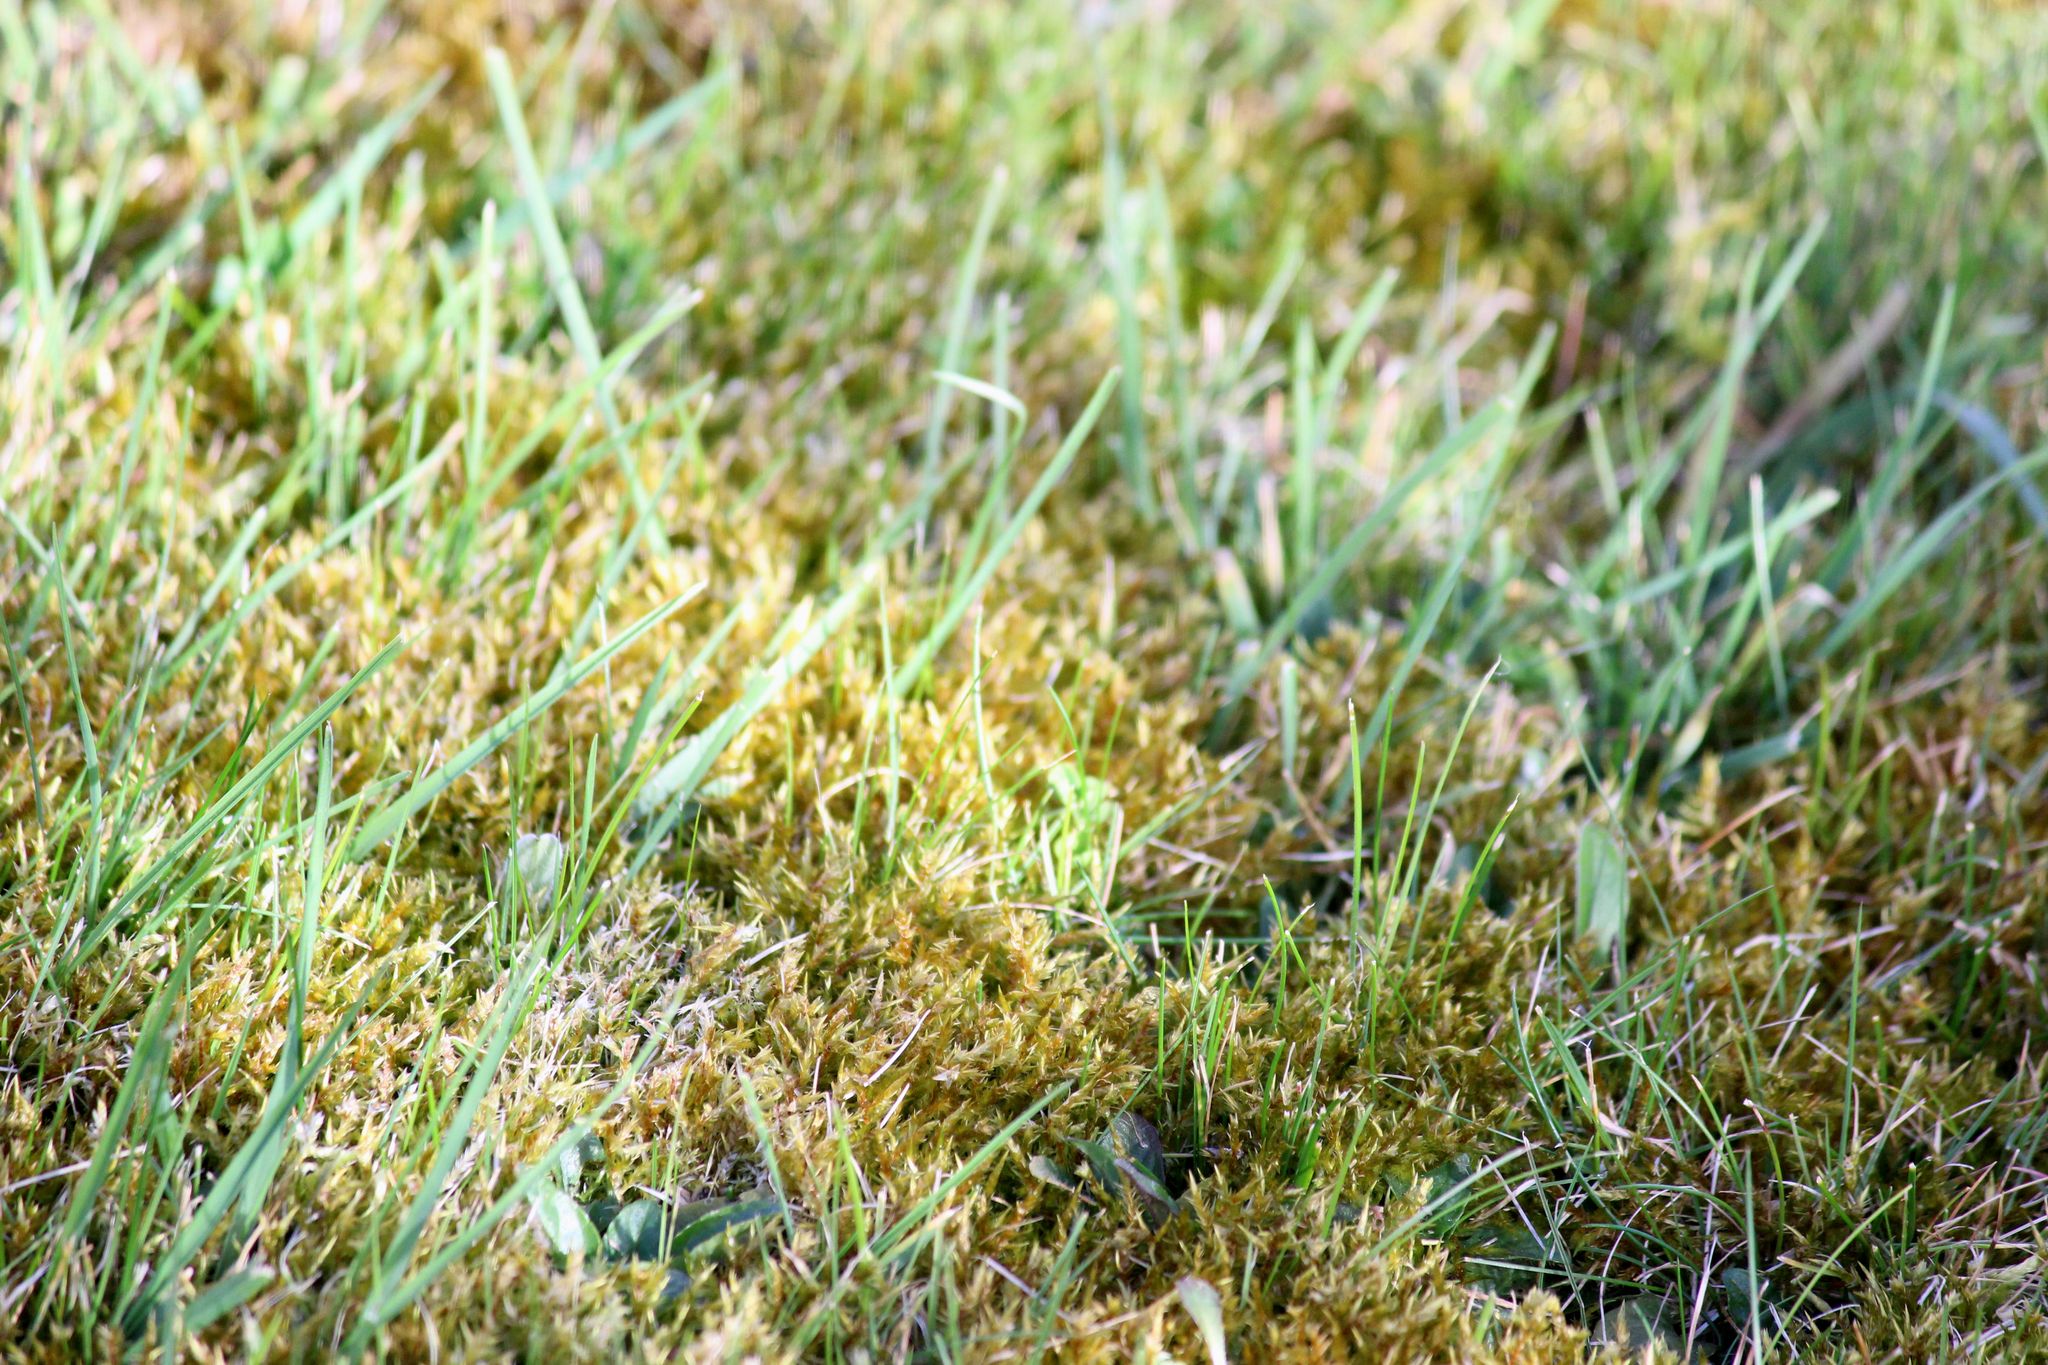 How do I control moss in fine mown turf?